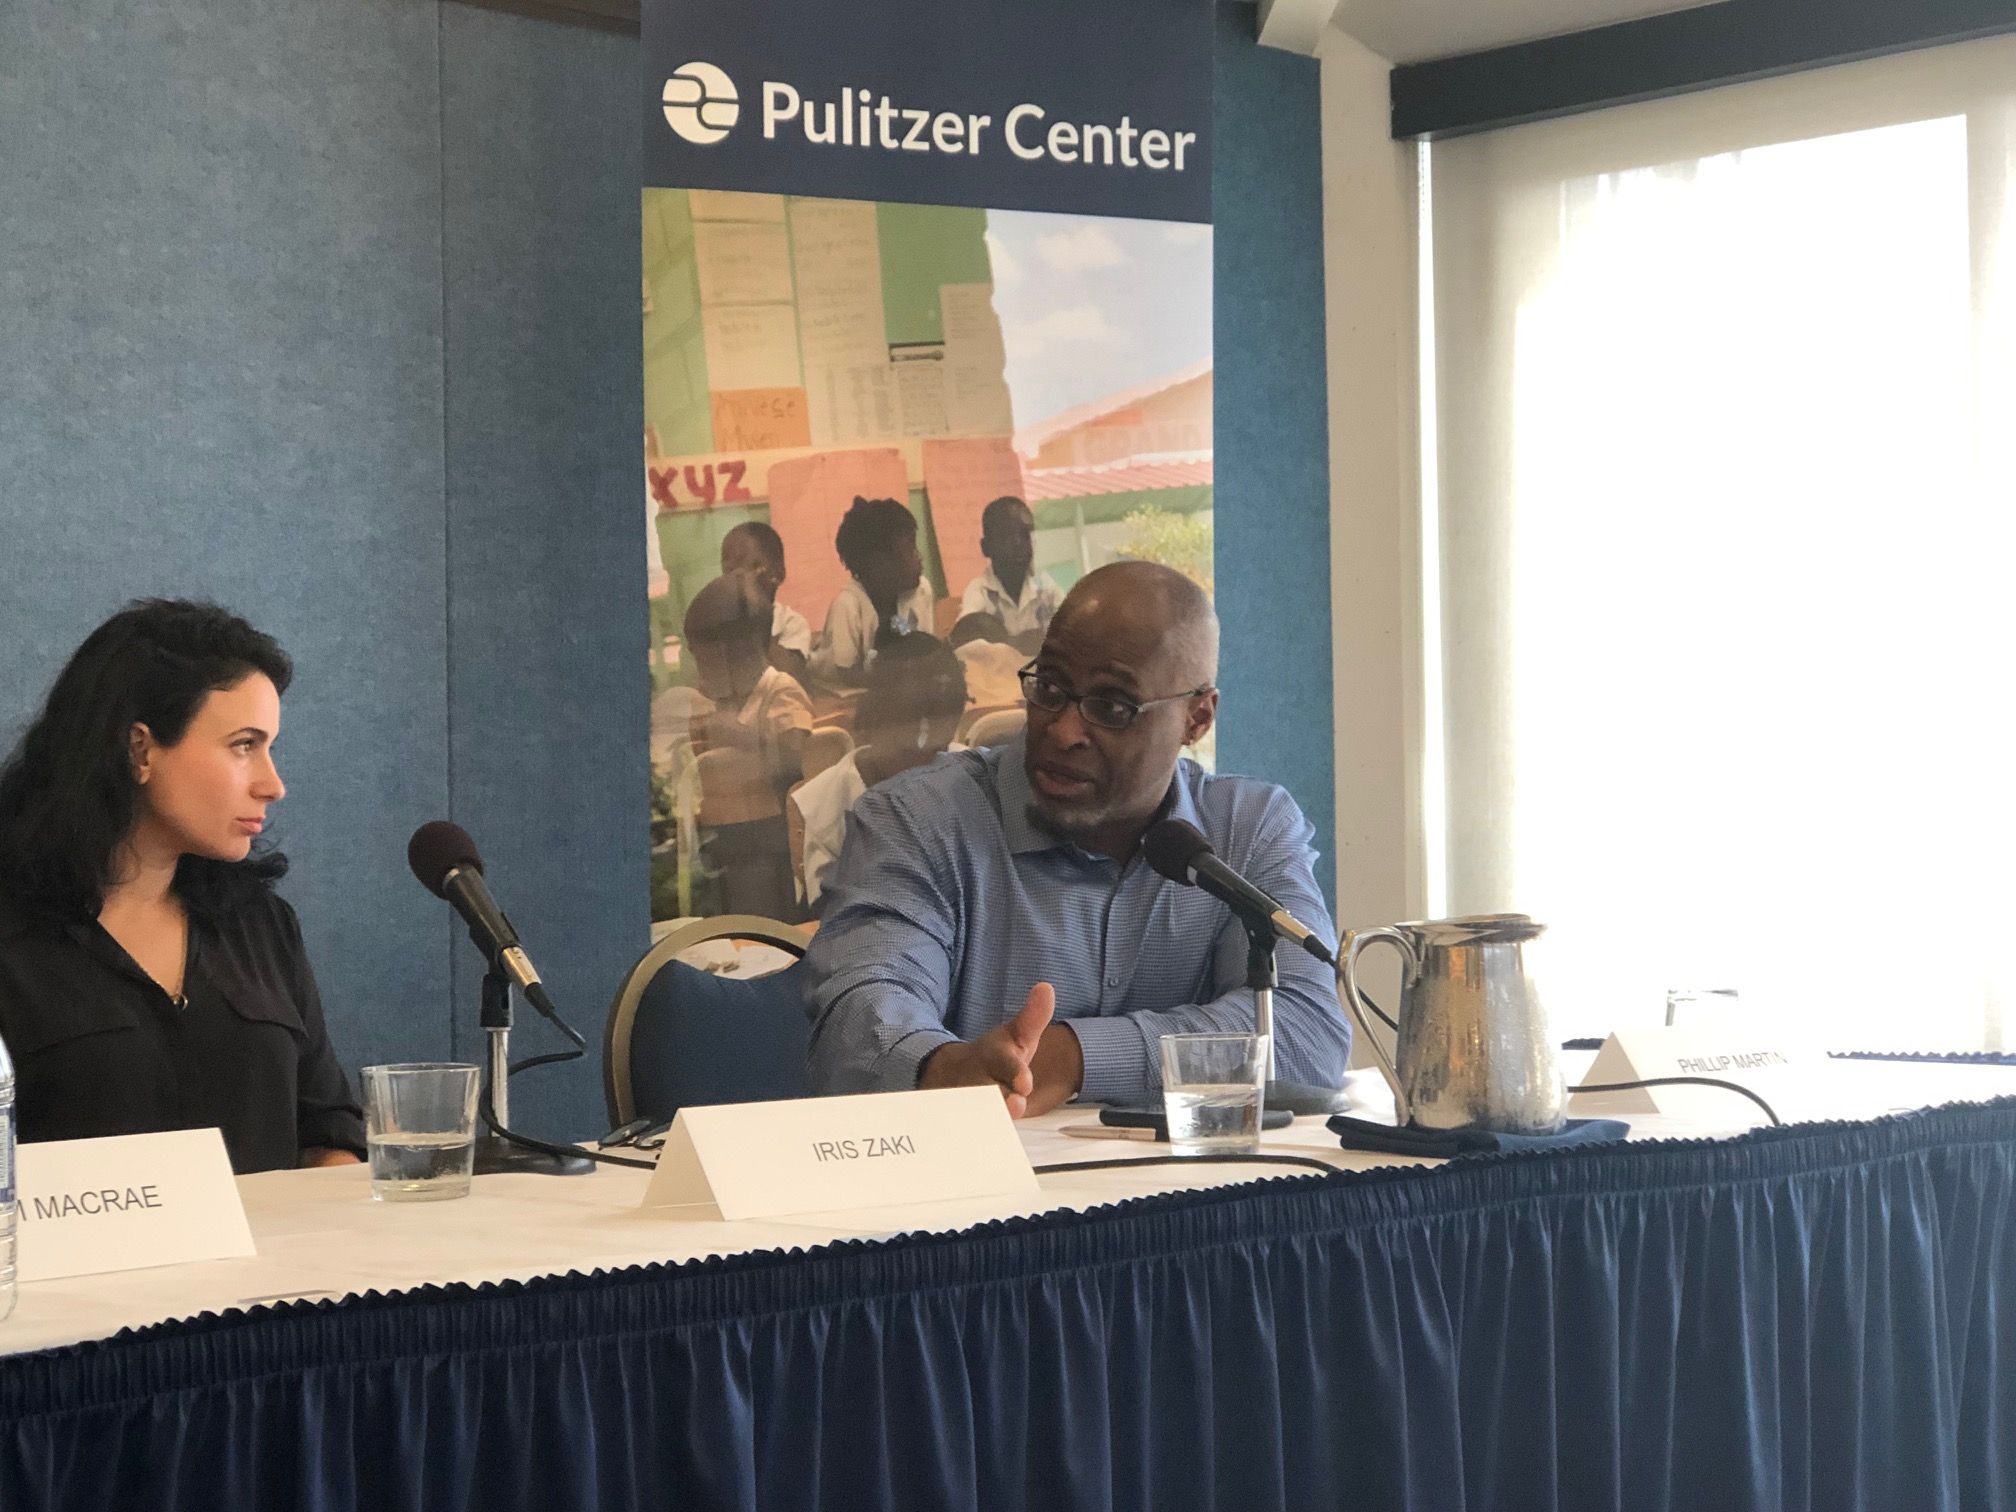 Phillip Martin discussing the persistence of caste discrimination in the United States. Image by Kem Sawyer. Washington, D.C., 2019.